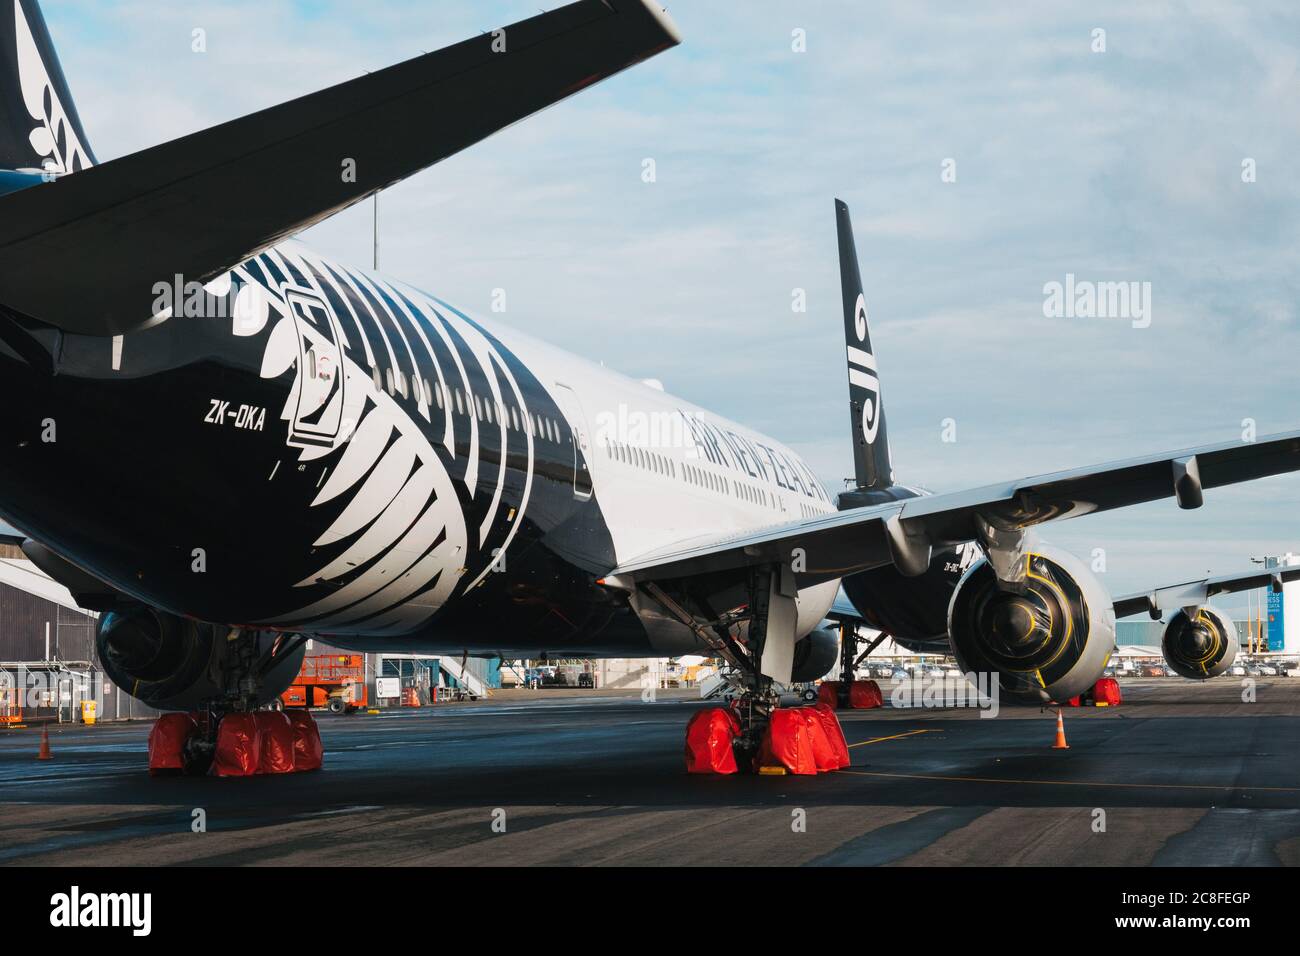 Boeing 777 aircraft in storage at Christchurch Airport, New Zealand, during the coronavirus pandemic Stock Photo